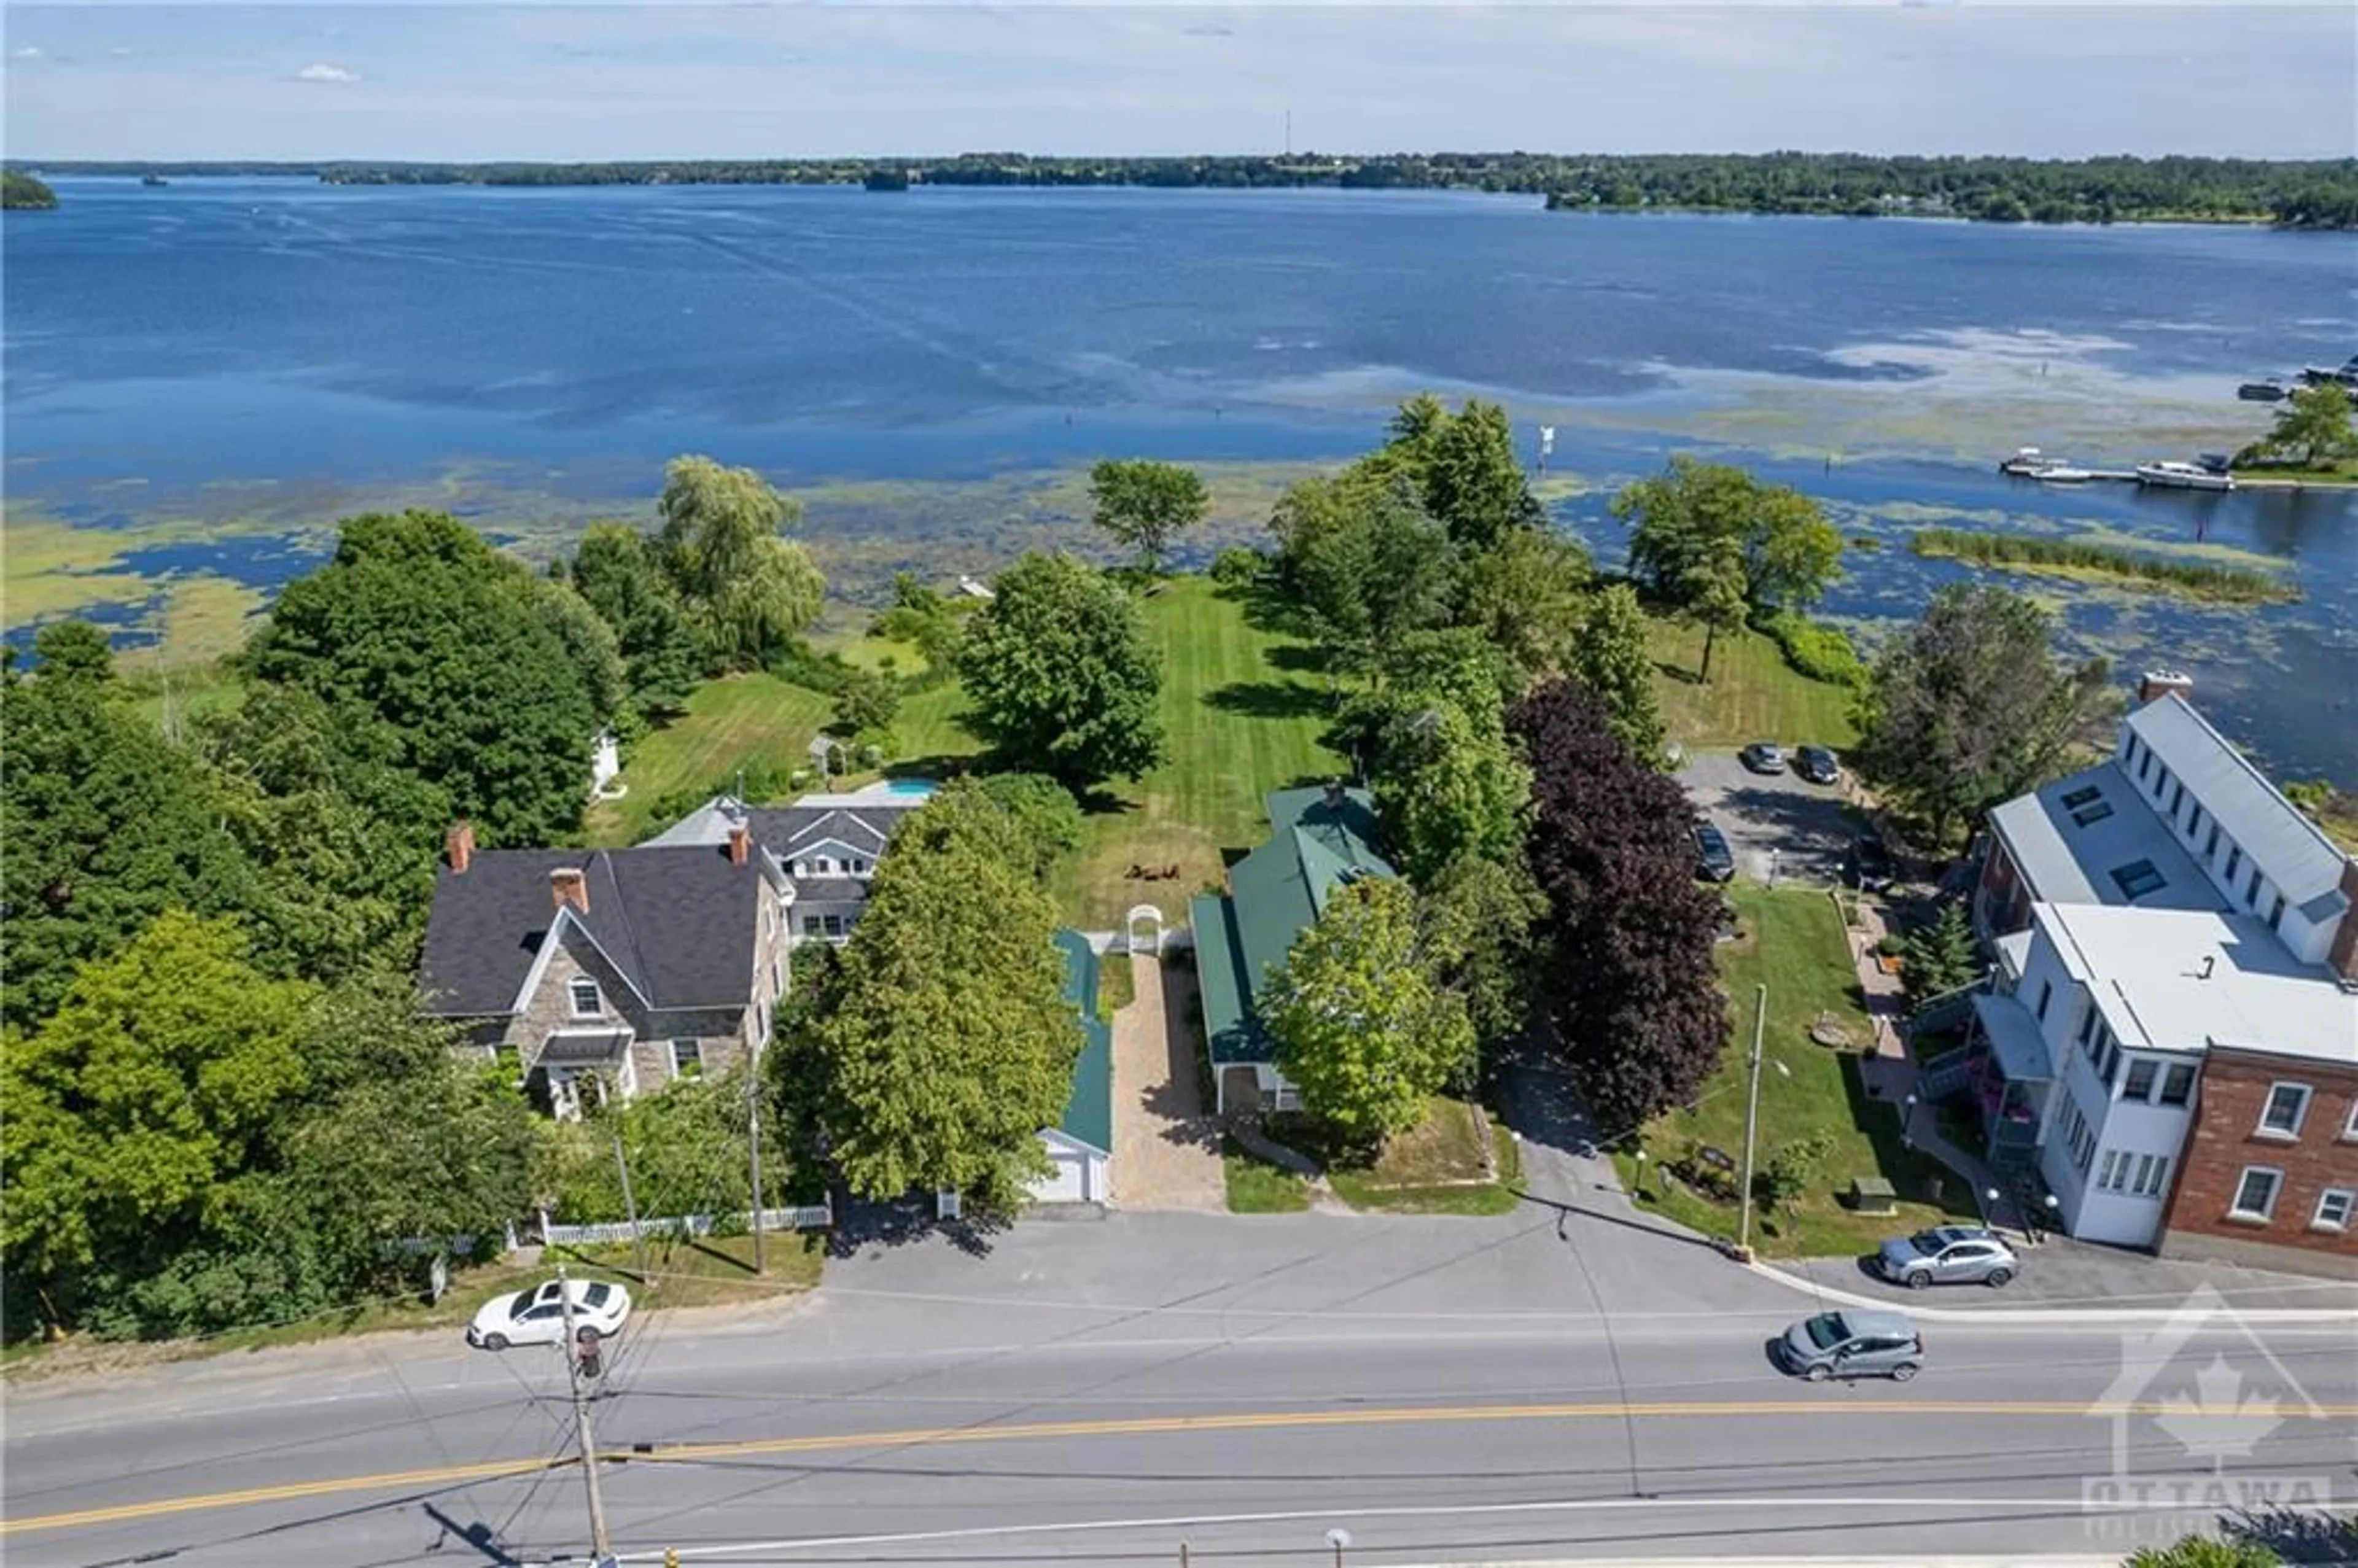 Lakeview for 17 MAIN St, Westport Ontario K0G 1X0